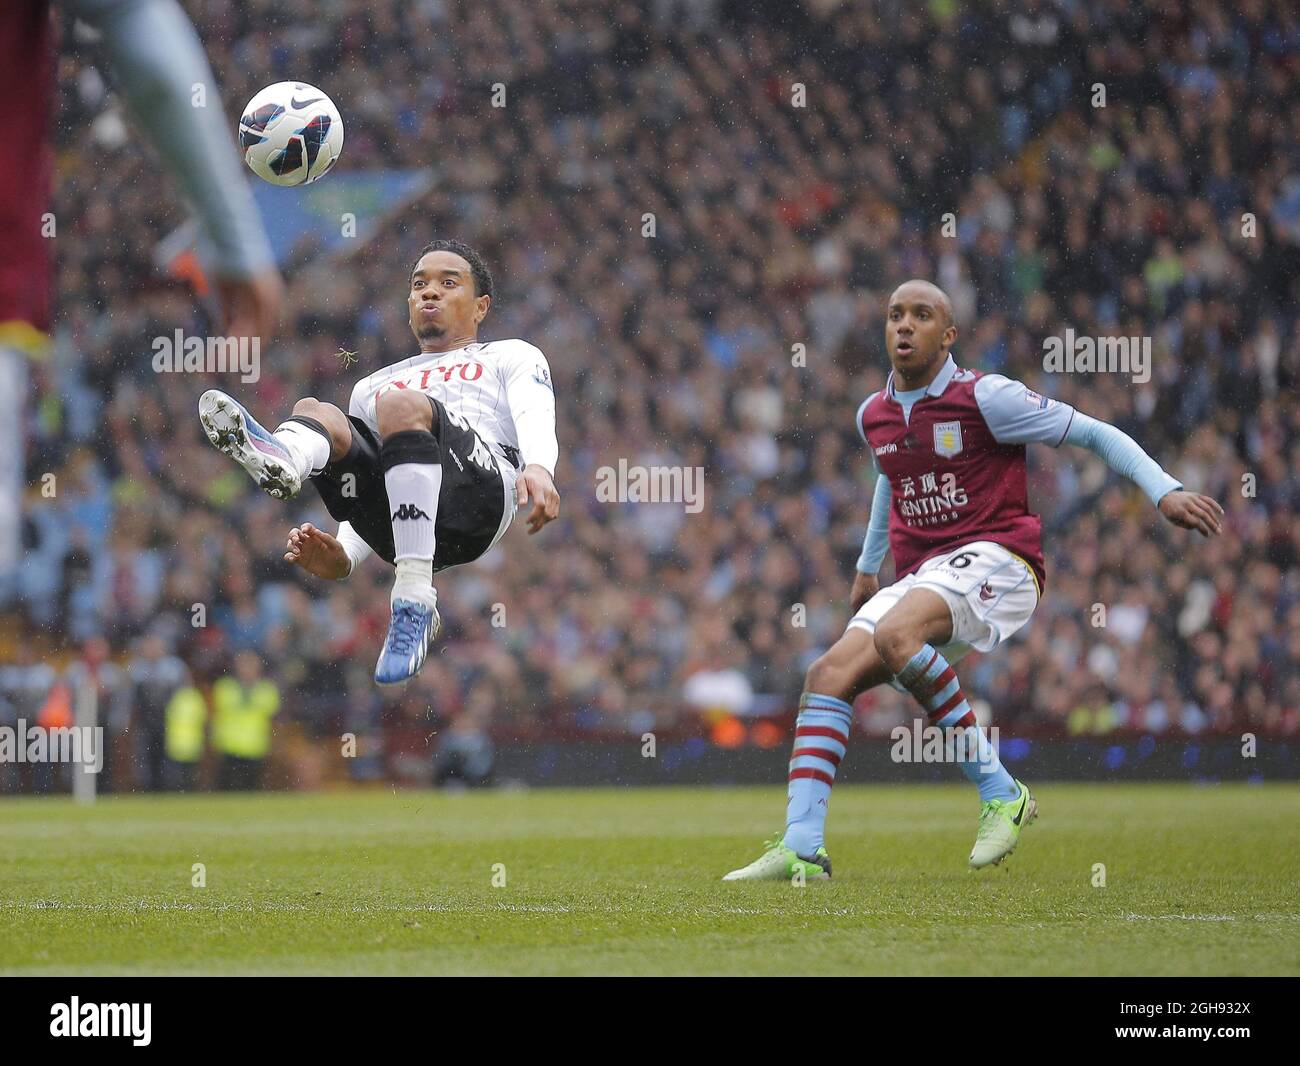 Eyong Enoh of Fulham (left) gets in an overhead kick with Fabian Delph of Aston Villa looking on during the Barclays Premiership match between Aston Villa and Fulham in Villa Park, UK on April 13, 2013. Stock Photo